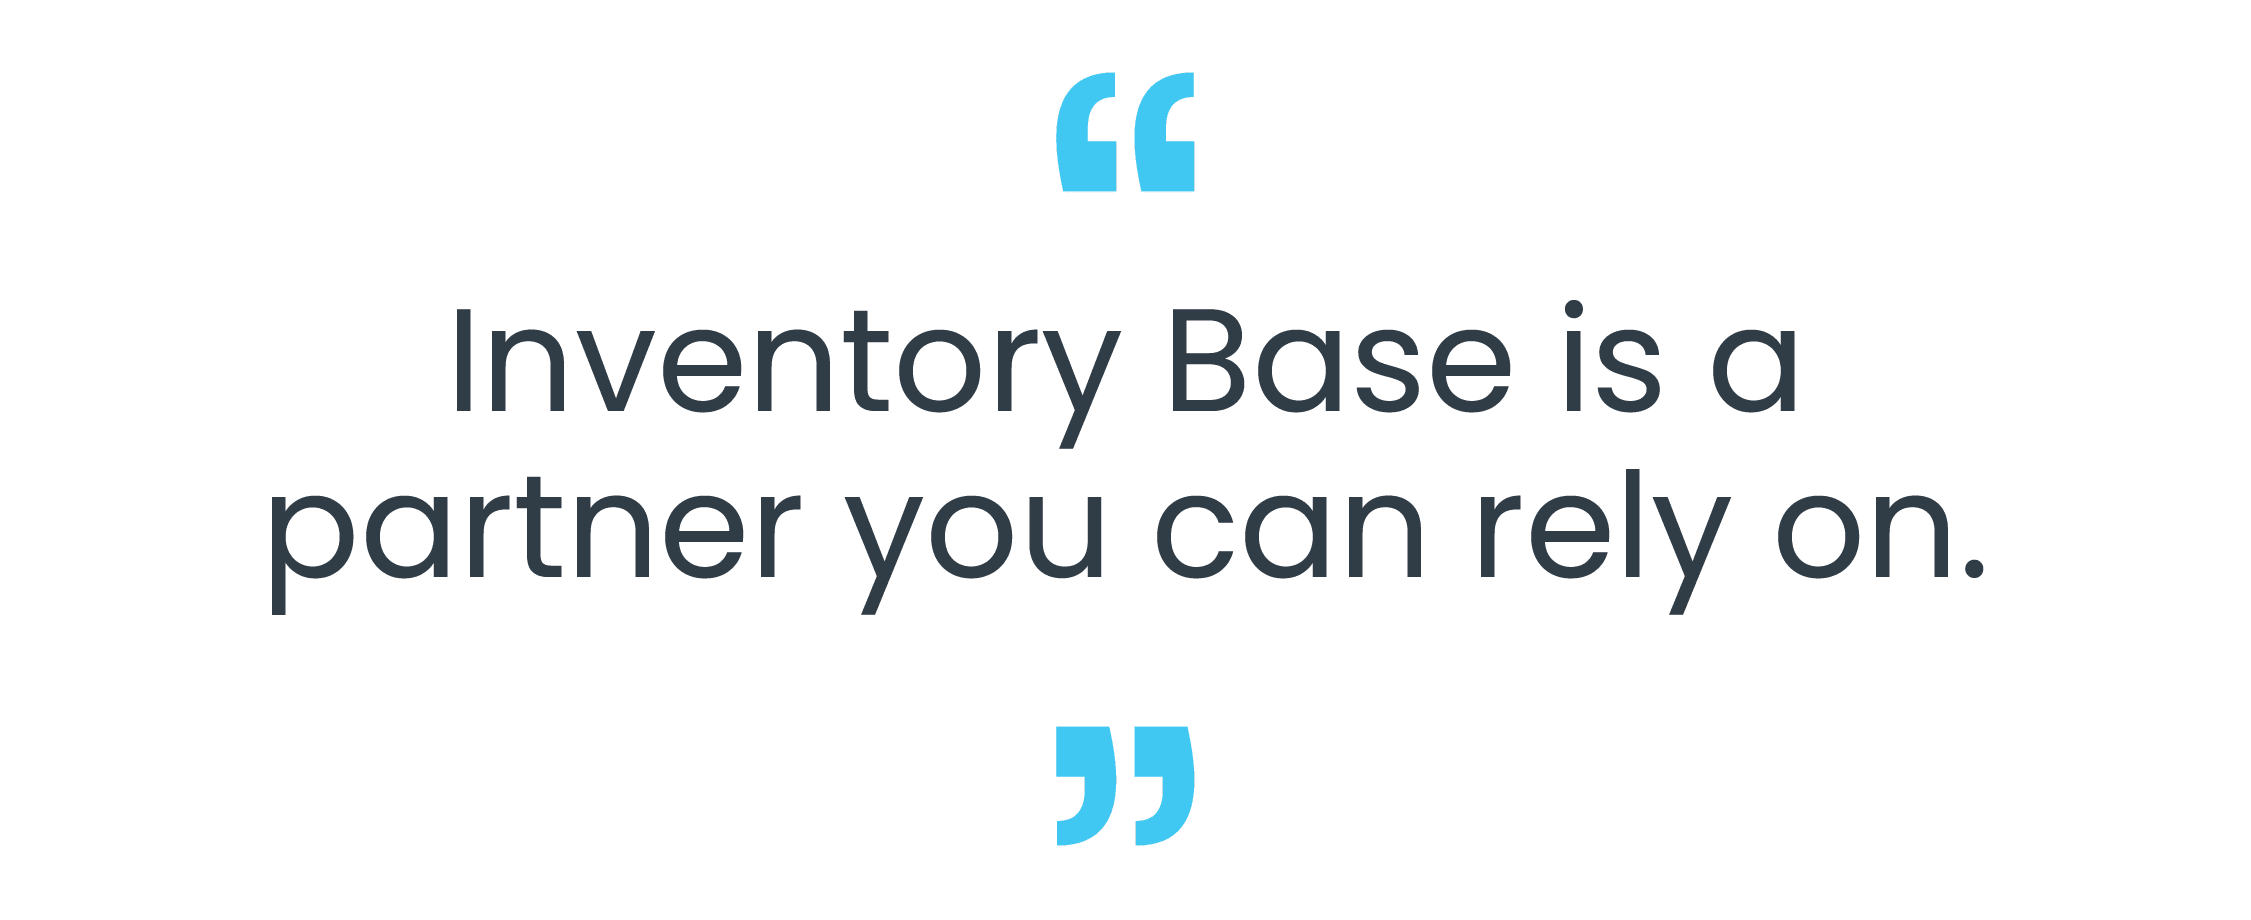 How Trust Inventory save 60 hours per week using Inventory Base